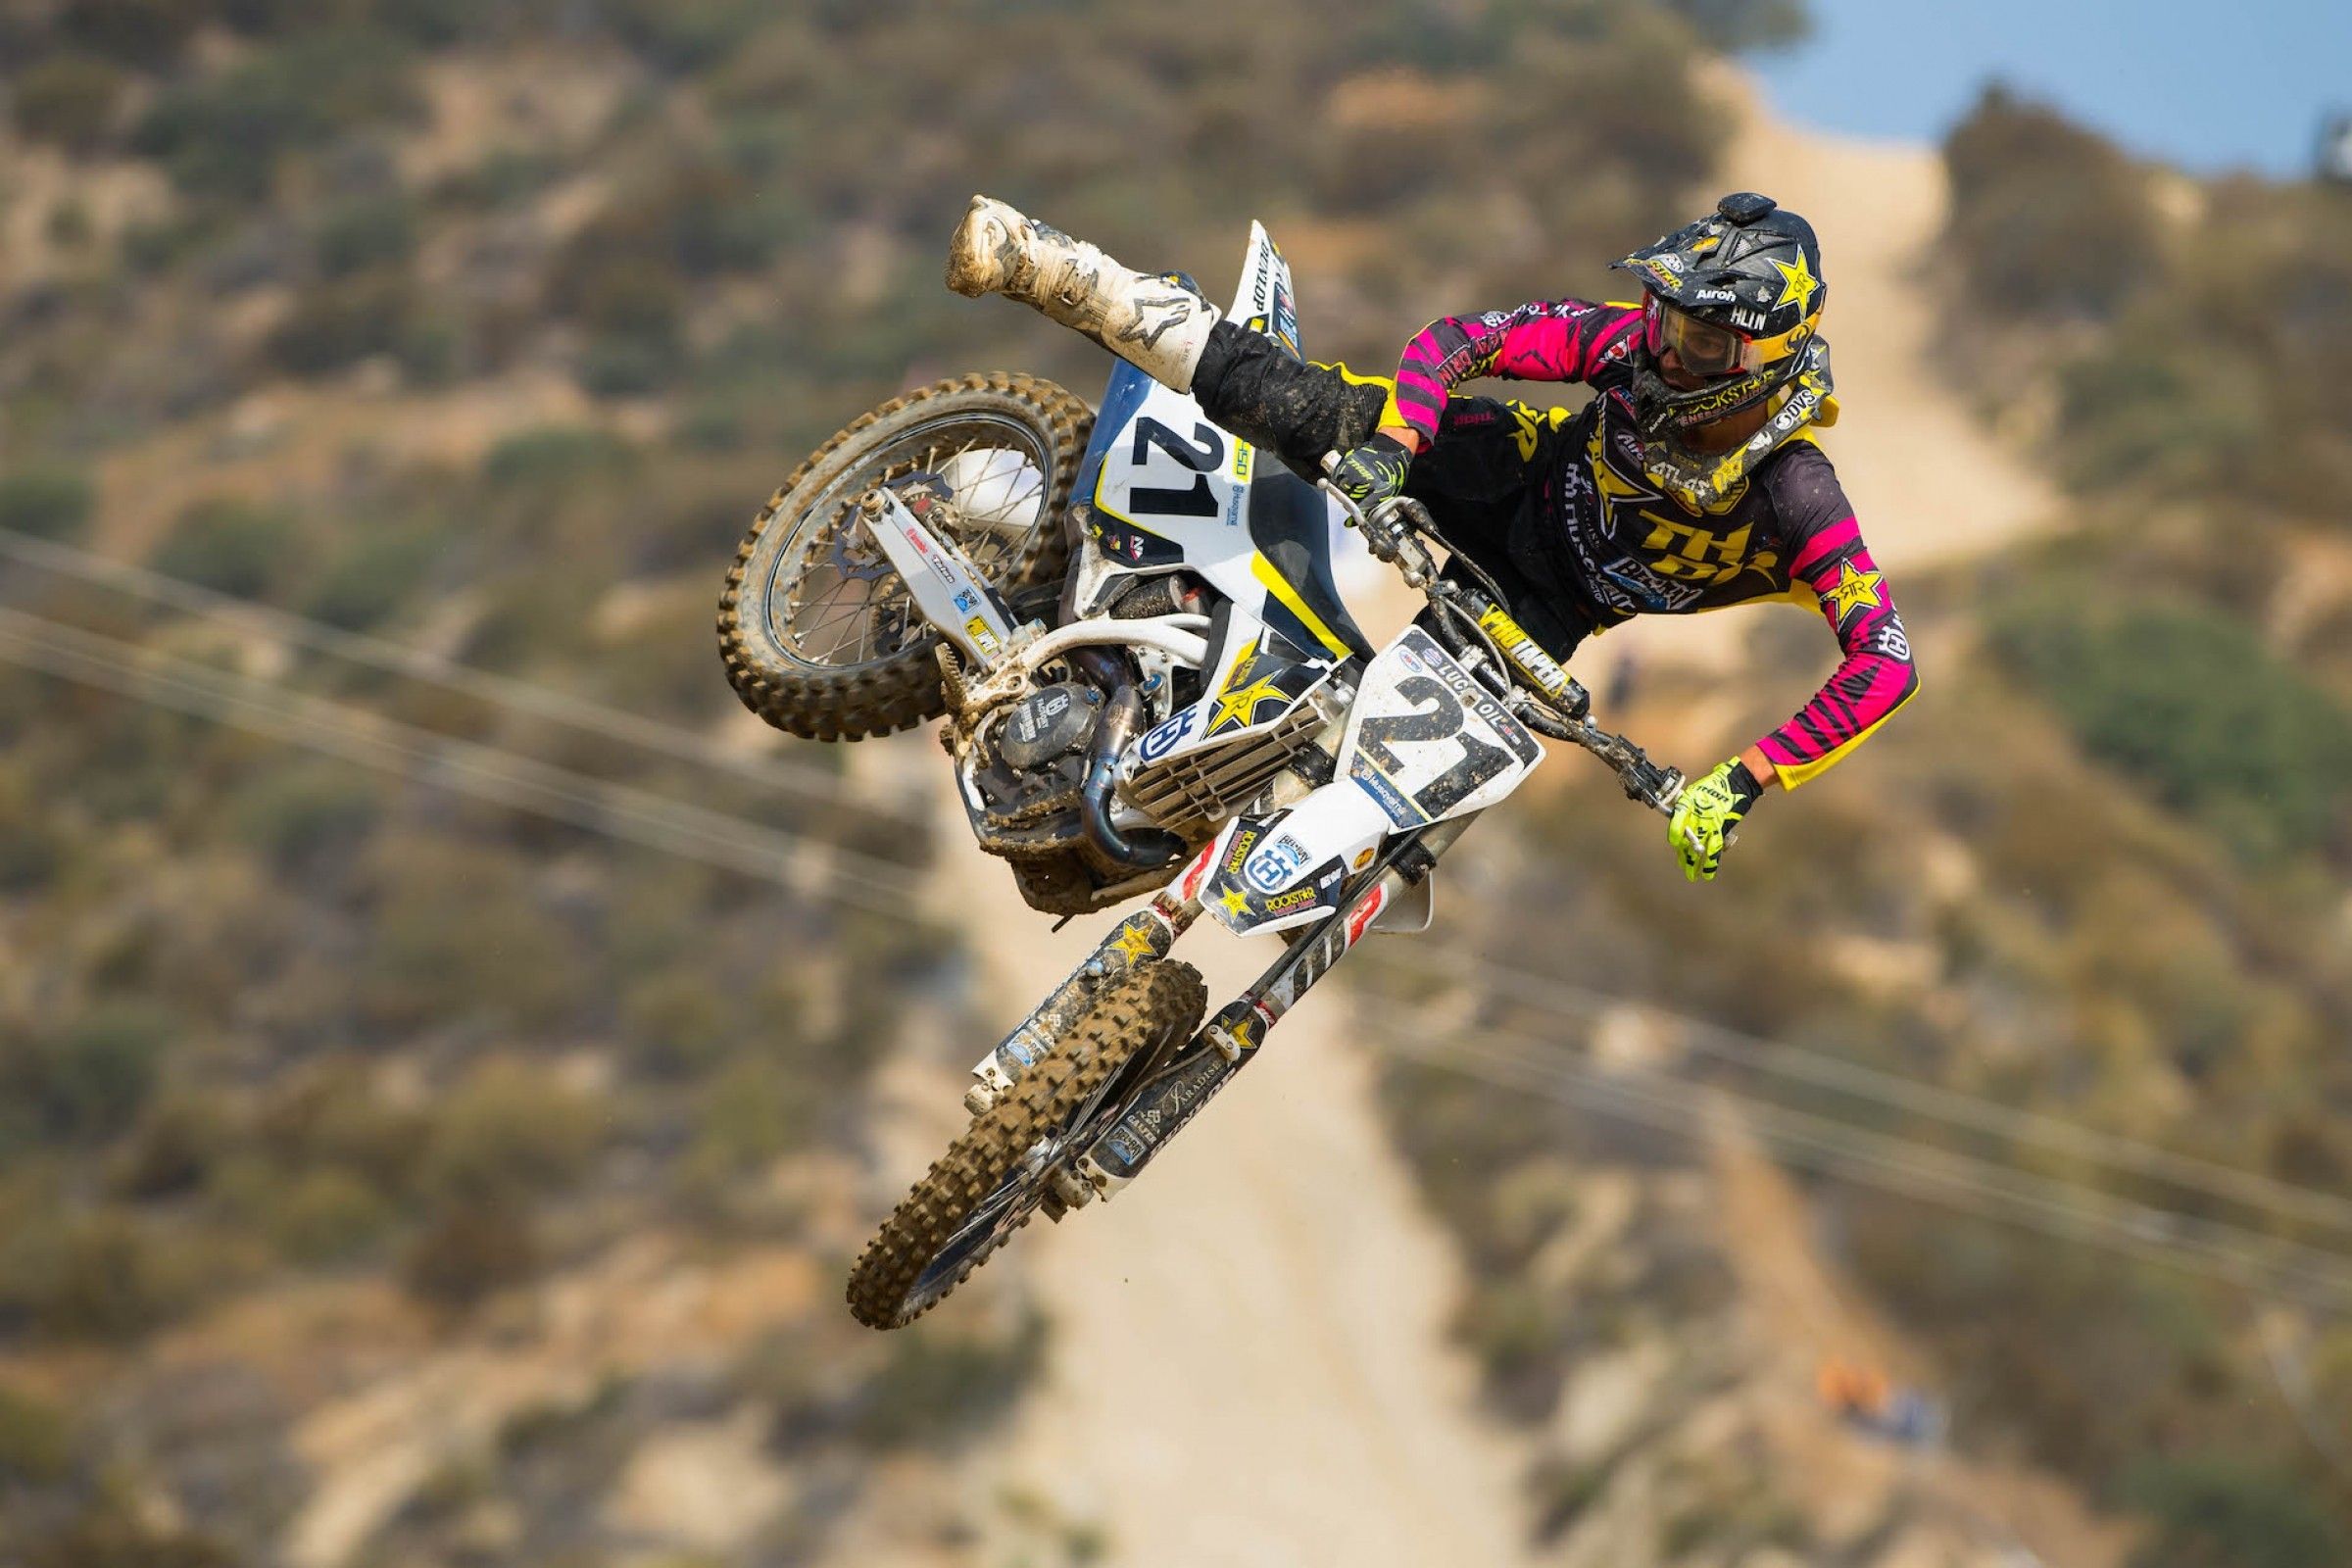 10 Awesome Hd Motocross Wallpapers - vrogue.co